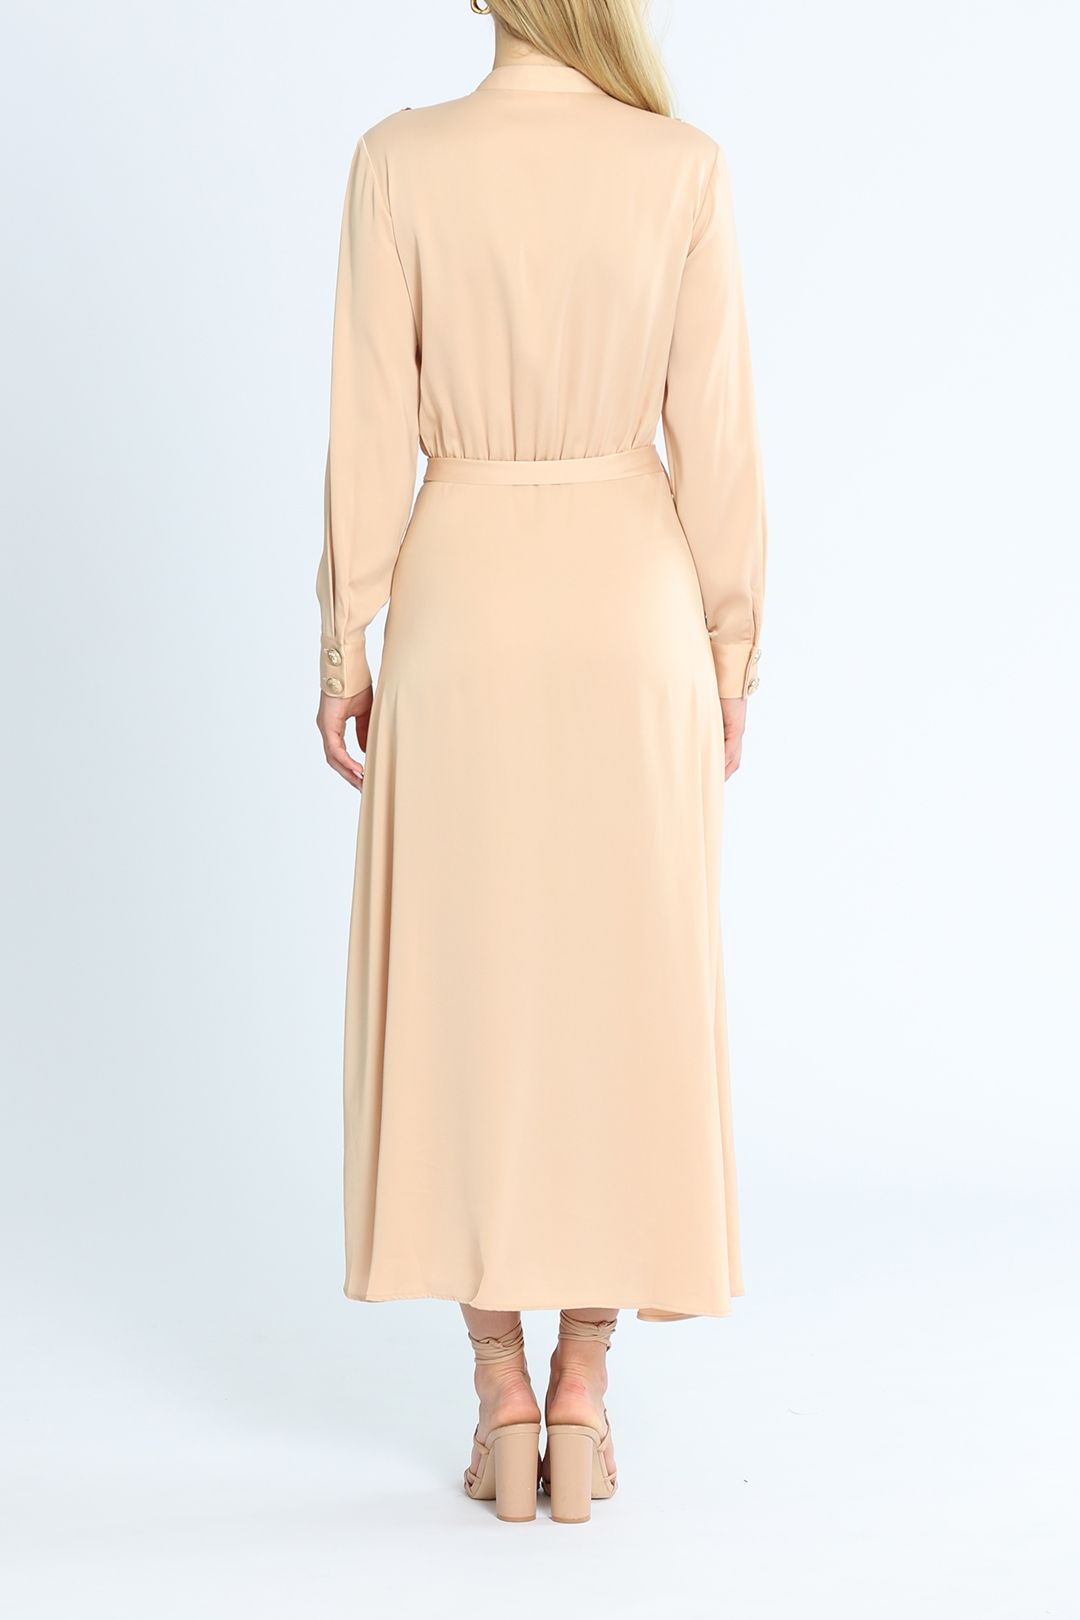 Belle and Bloom Lover To Lover Maxi Shirt Dress Nude Leg Split